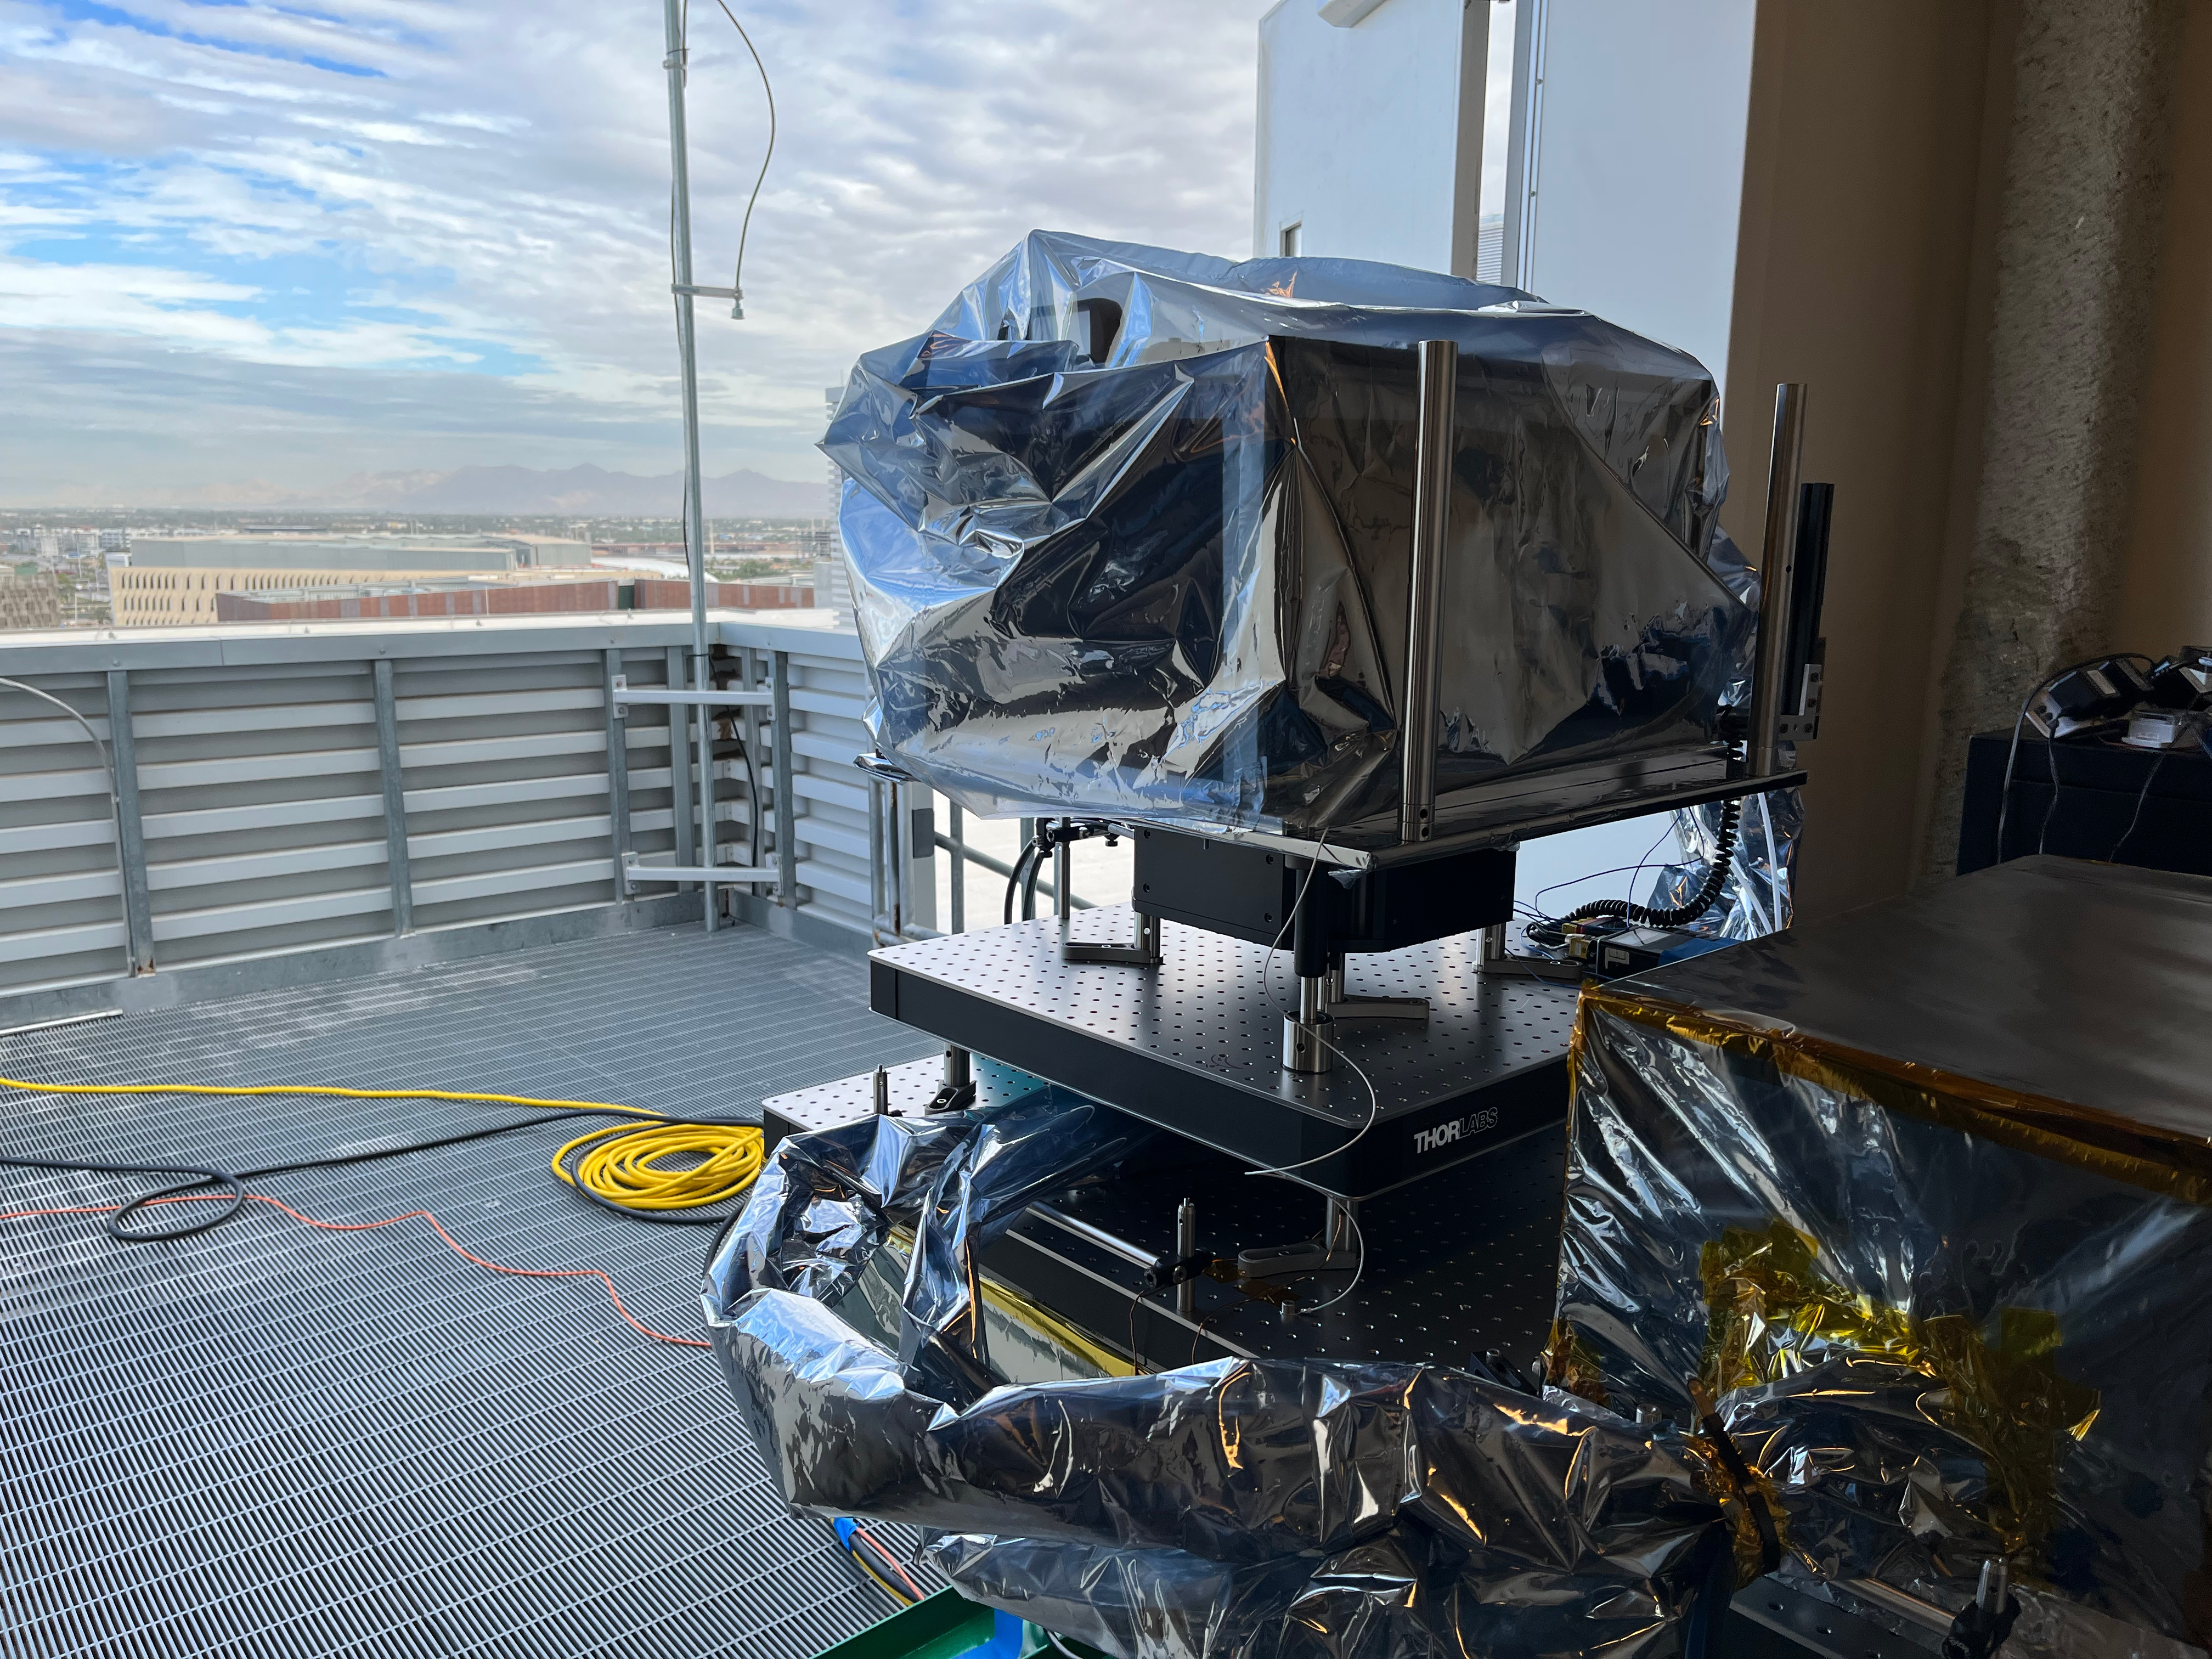 Europa Clipper’s thermal imager is shown here in its protective enclosure, viewing the Tempe Campus of Arizona State University during testing on a rooftop lab.